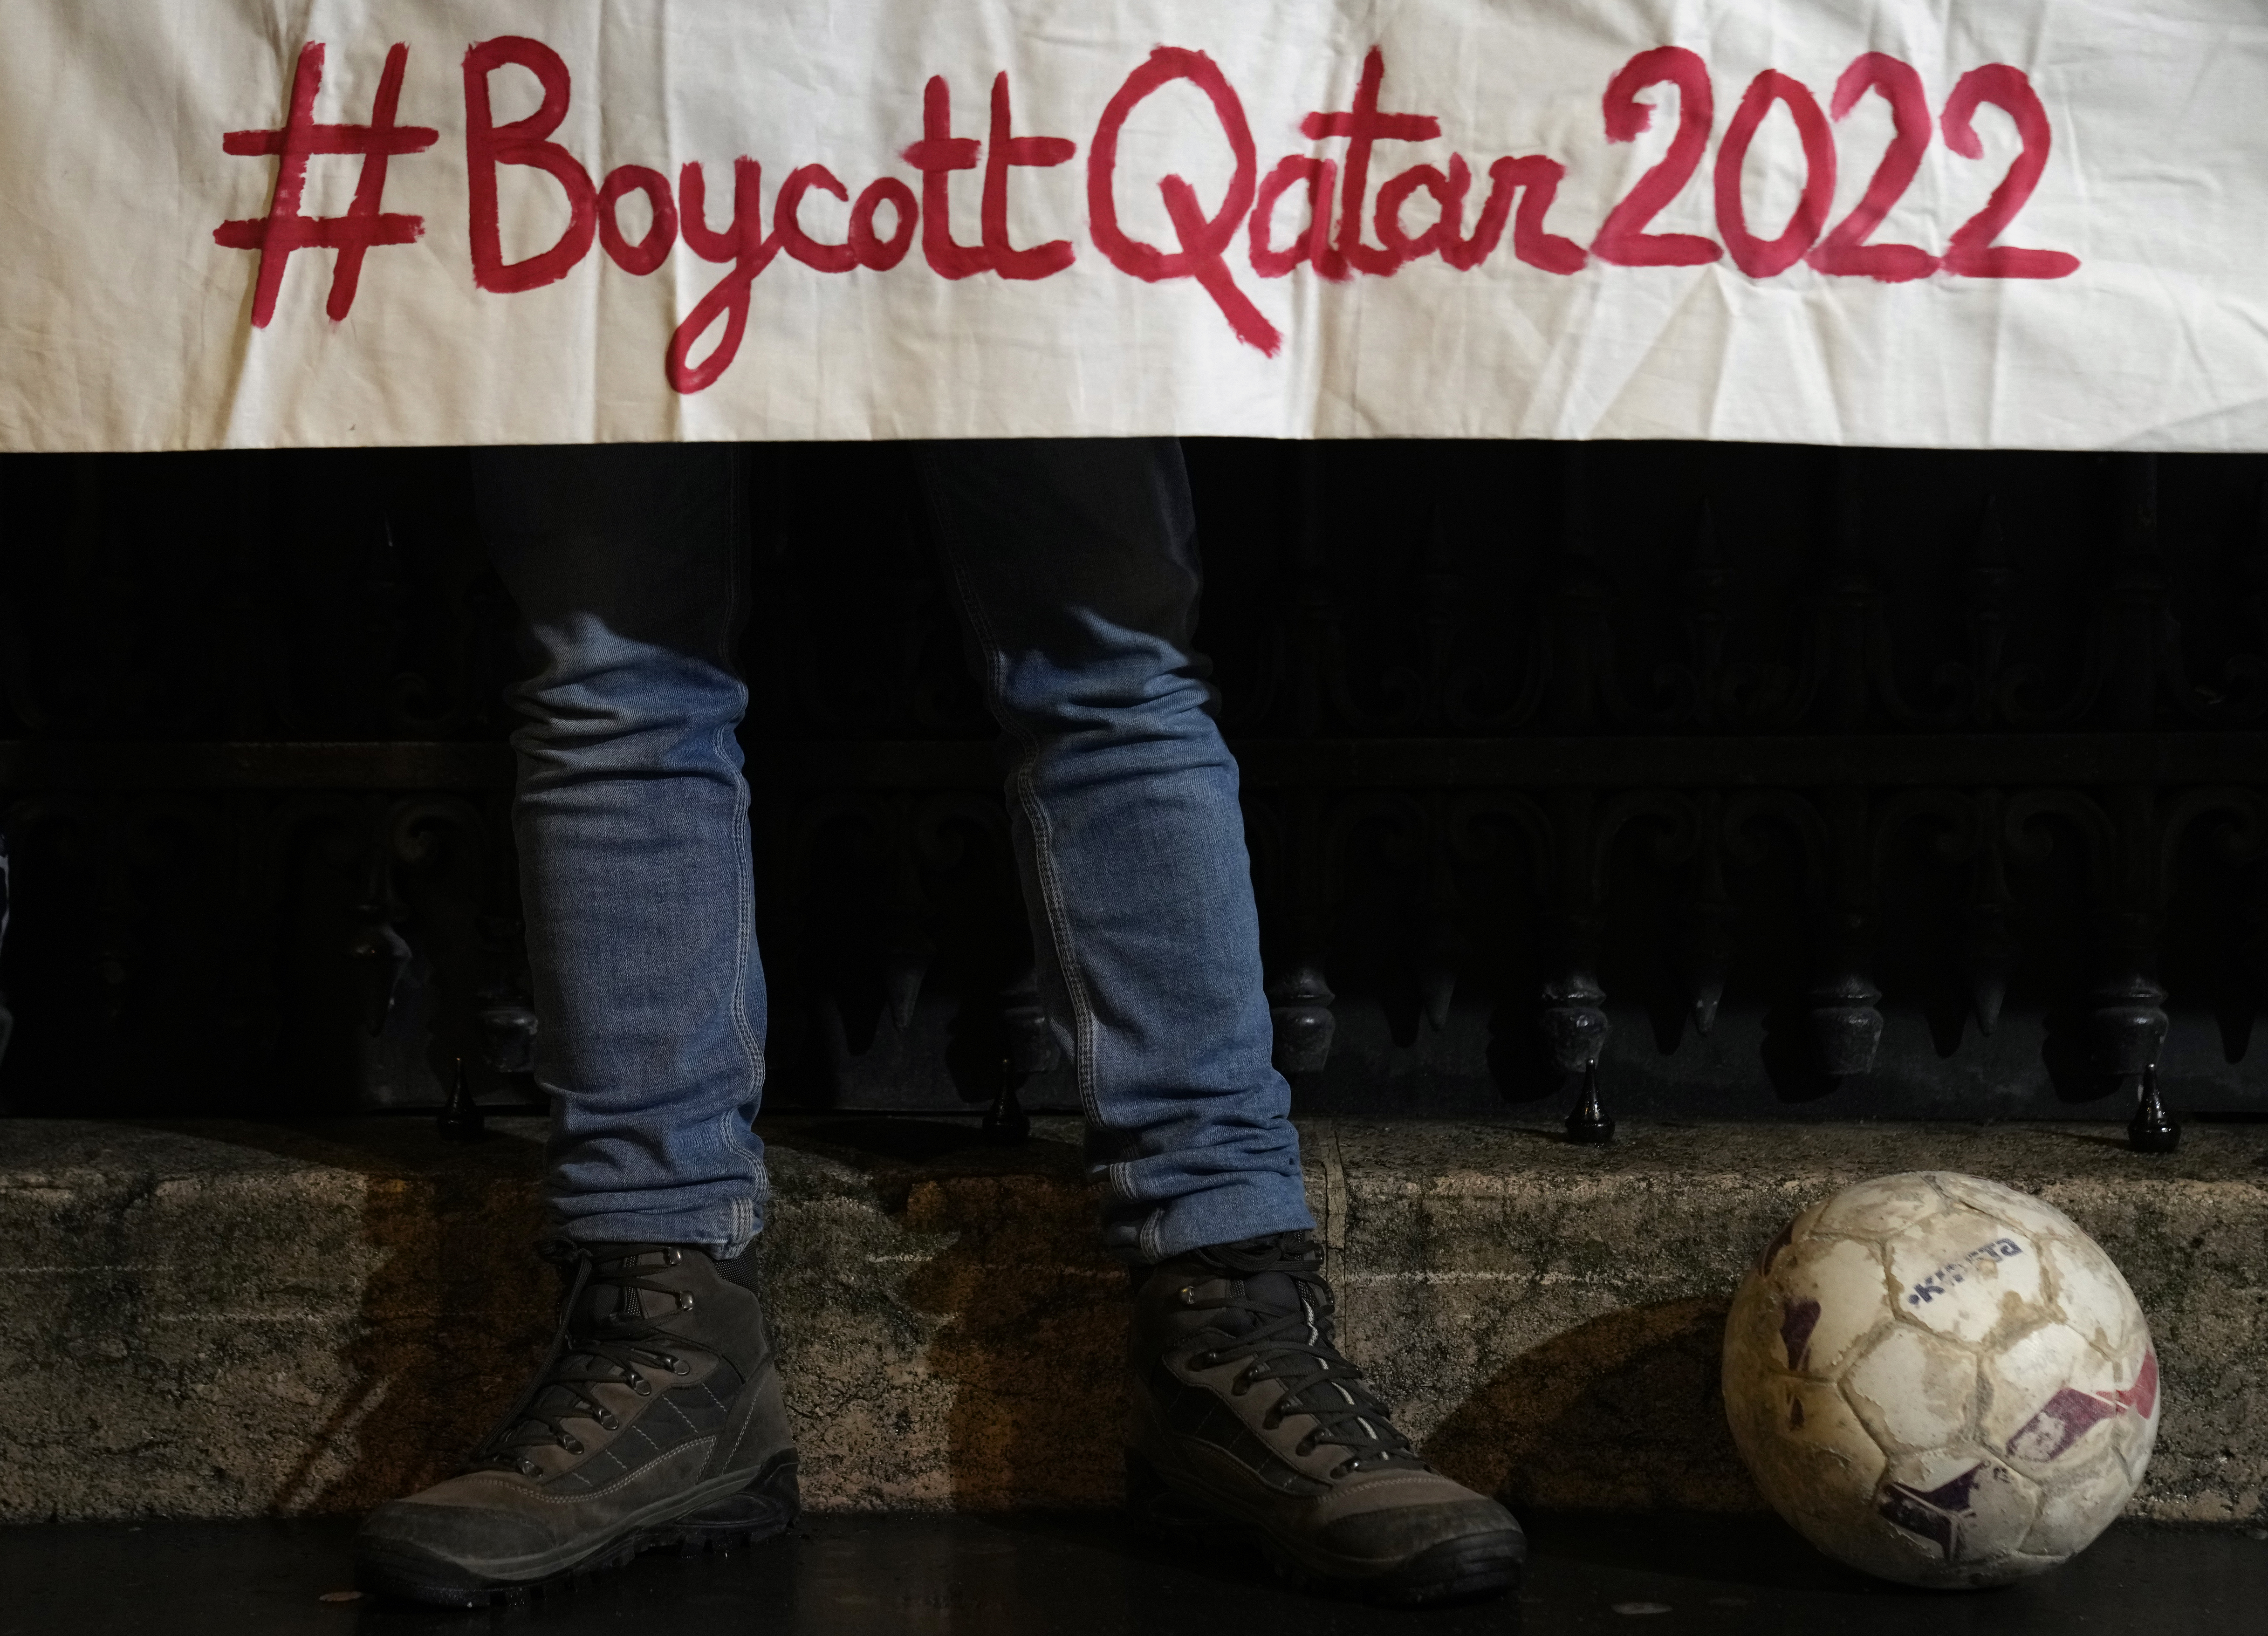 FIFA earns $7.5 bn in revenue from ticket sales, rights during Qatar World  Cup 2022: Report - BusinessToday